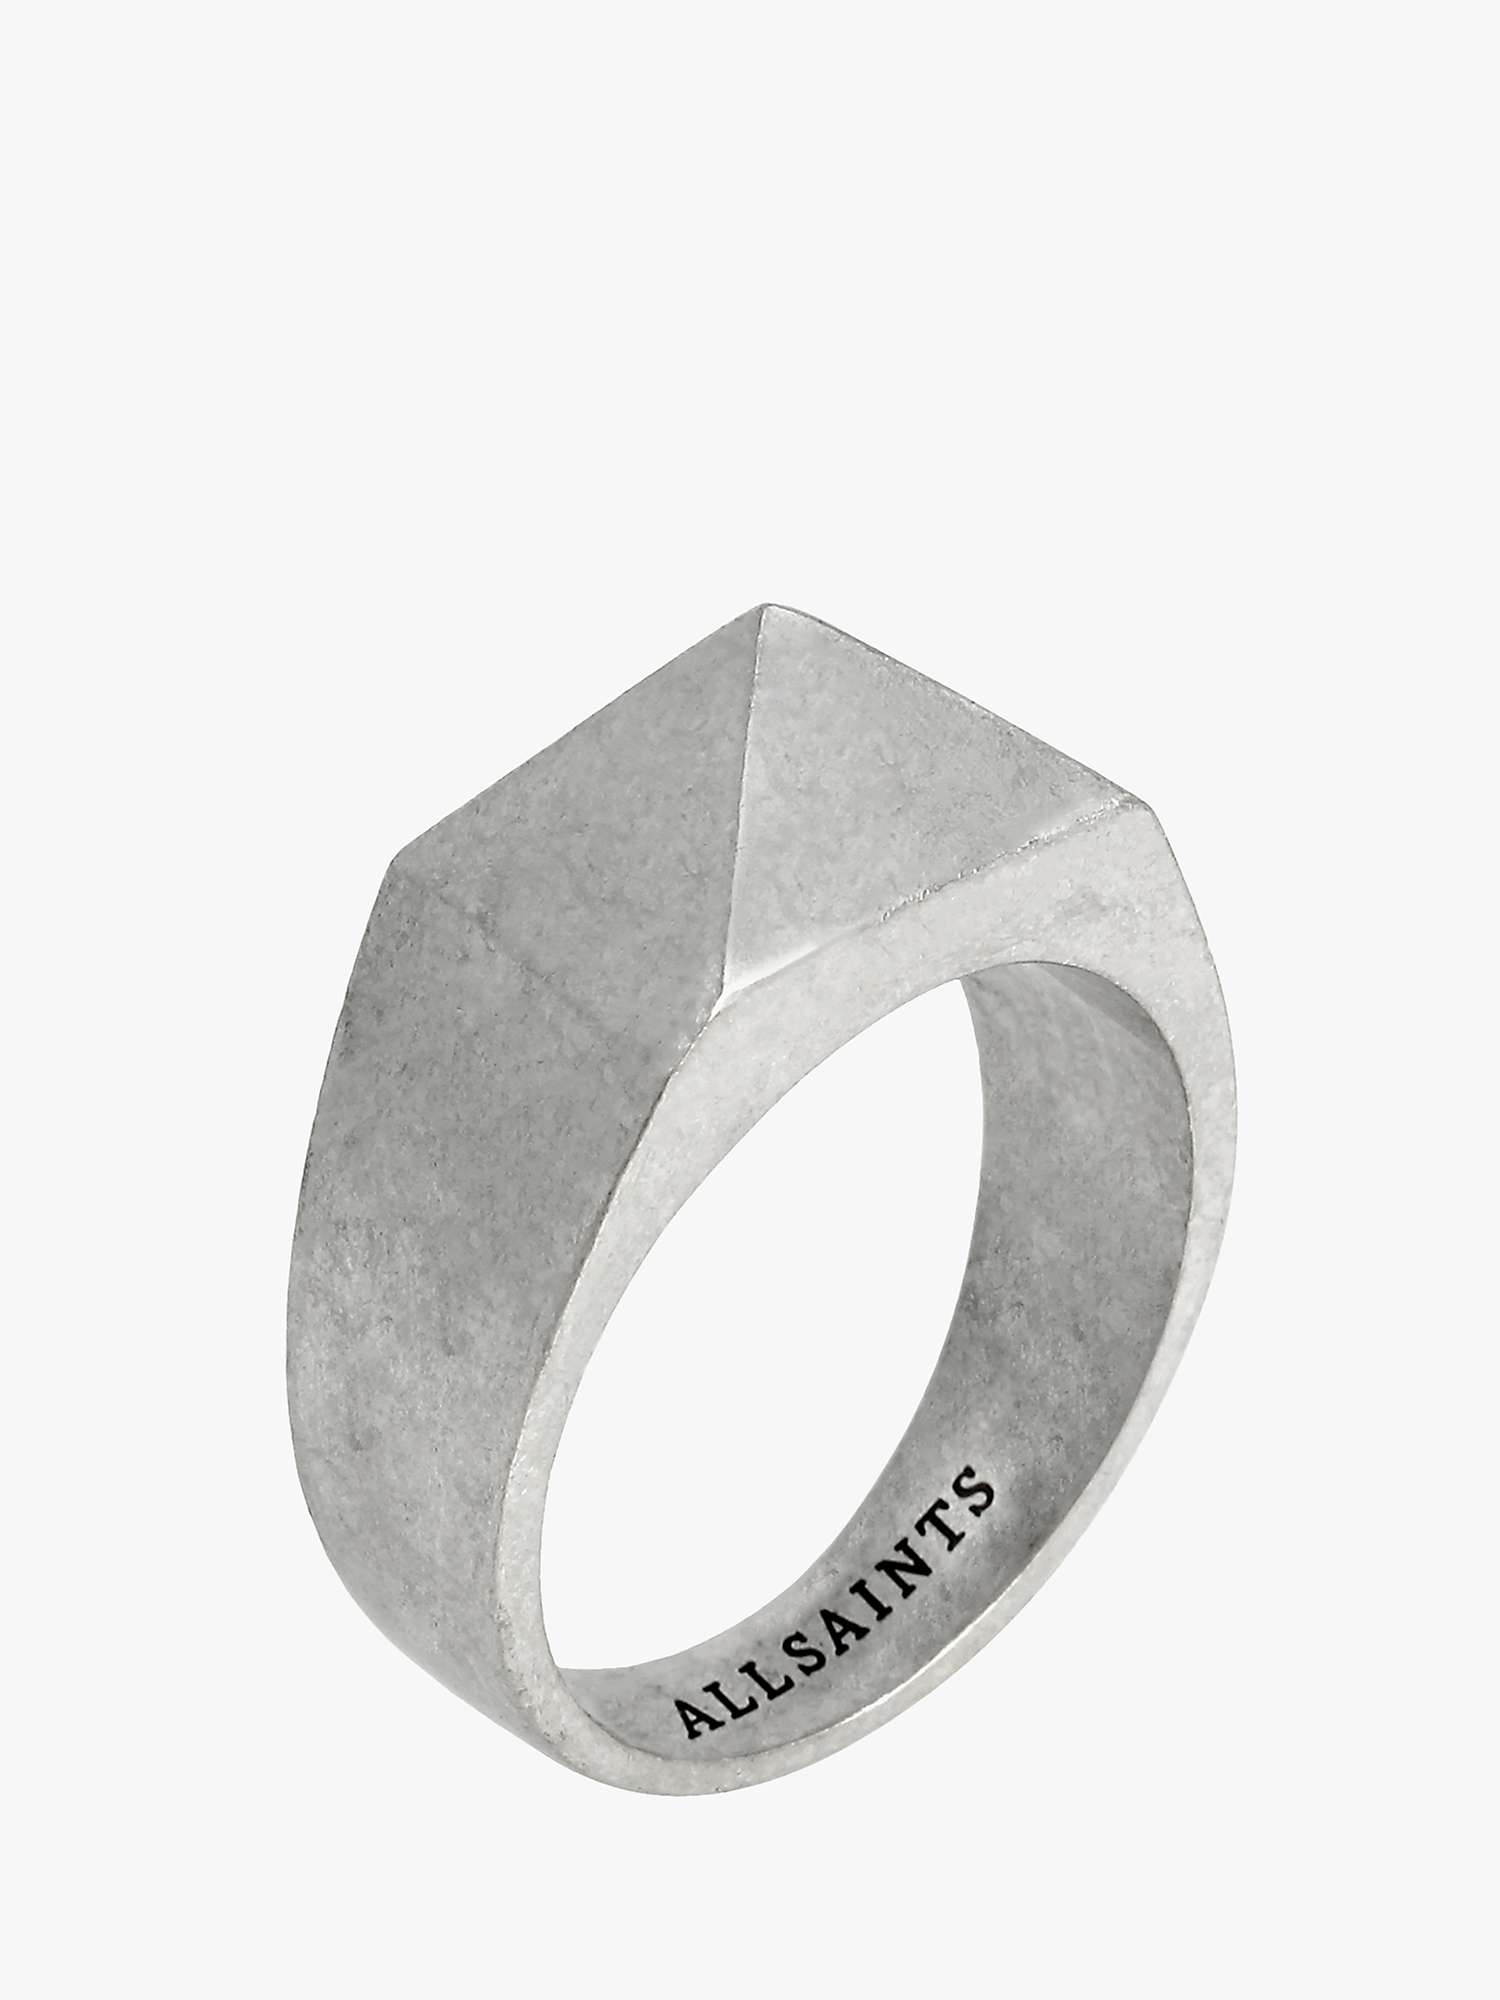 Buy AllSaints Pyramid Signet Ring, Warm Silver Online at johnlewis.com